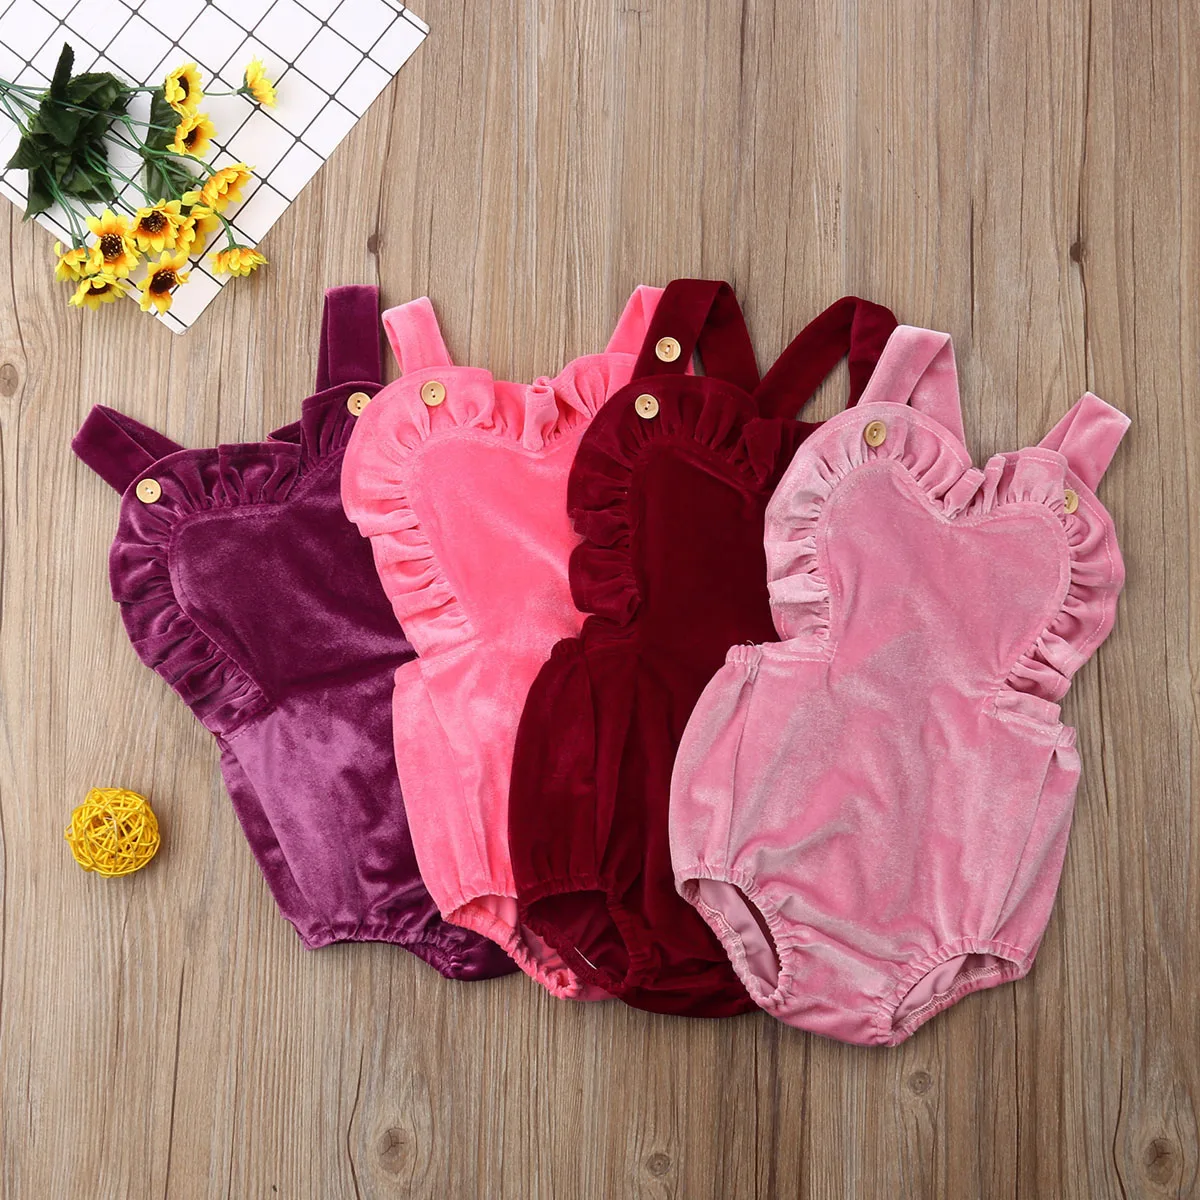 

Pudcoco 2019 Summer Solid Newborn Kids Baby Girls Valentine Ruffle Sunsuit Bodysuit Outfits Clothes Casual Summer